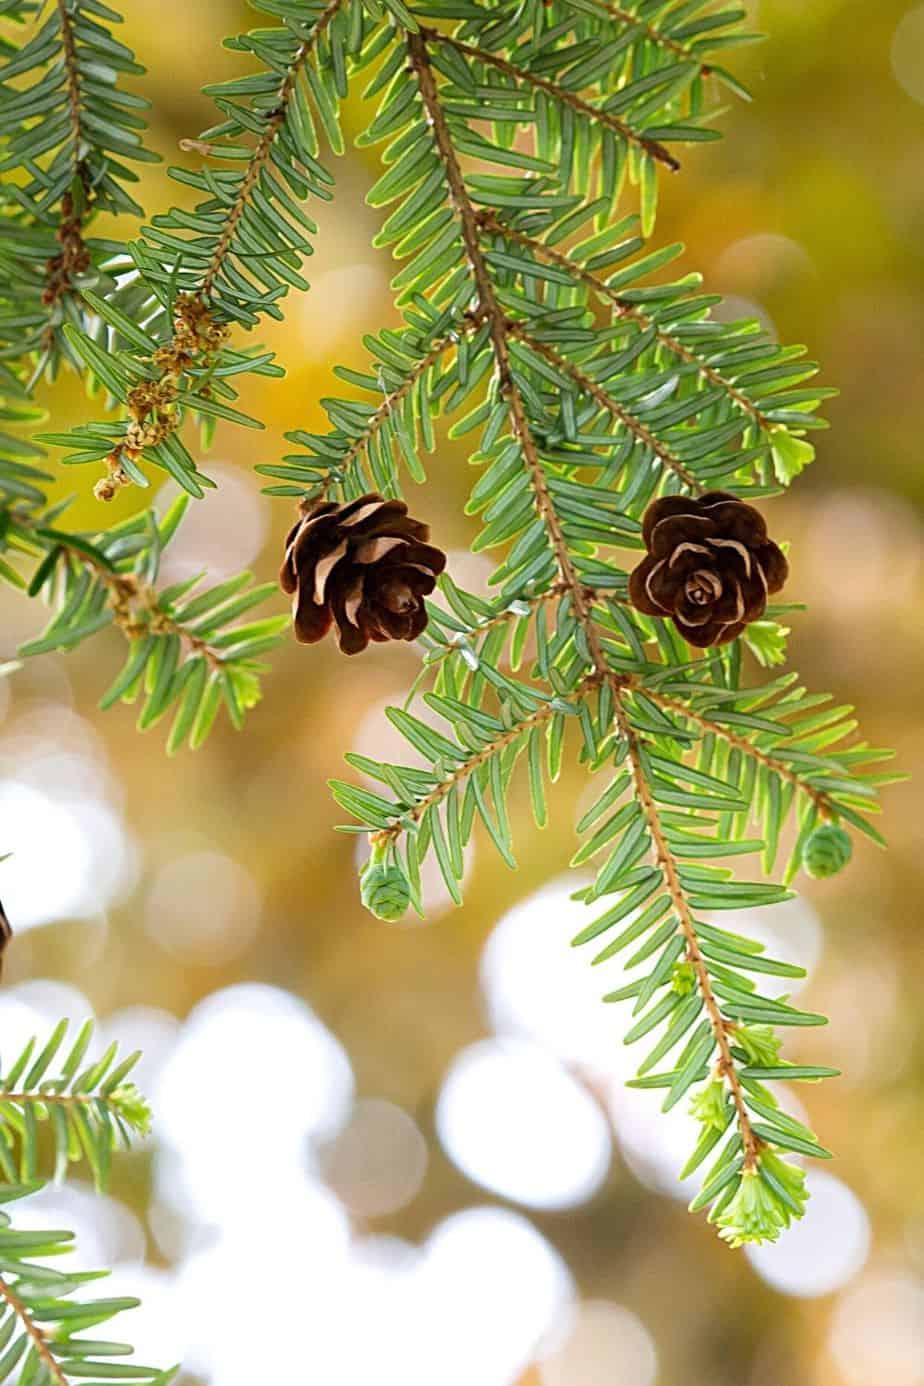 Canadian Hemlock, though a forest tree, can be grown on your north-facing balcony, making sure to prune them properly